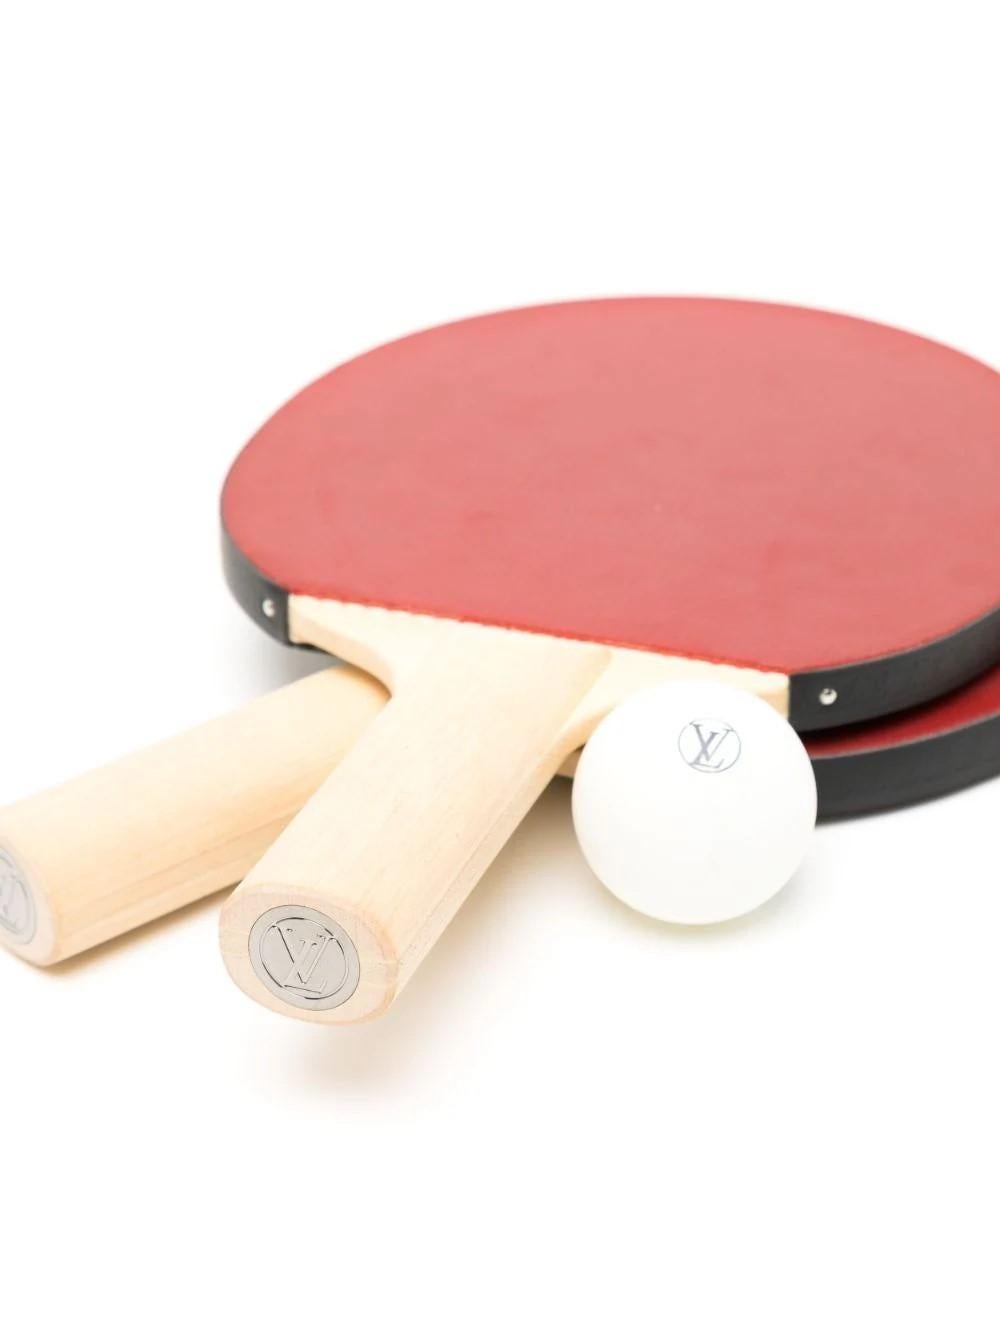 Uphold the rules of the game with this sophisticated Ping Pong Set from the James Monogram Eclipse Collection. This portable set includes two professionally designed Ping-Pong paddles, two regulation balls in a custom holder, and an exclusive cover